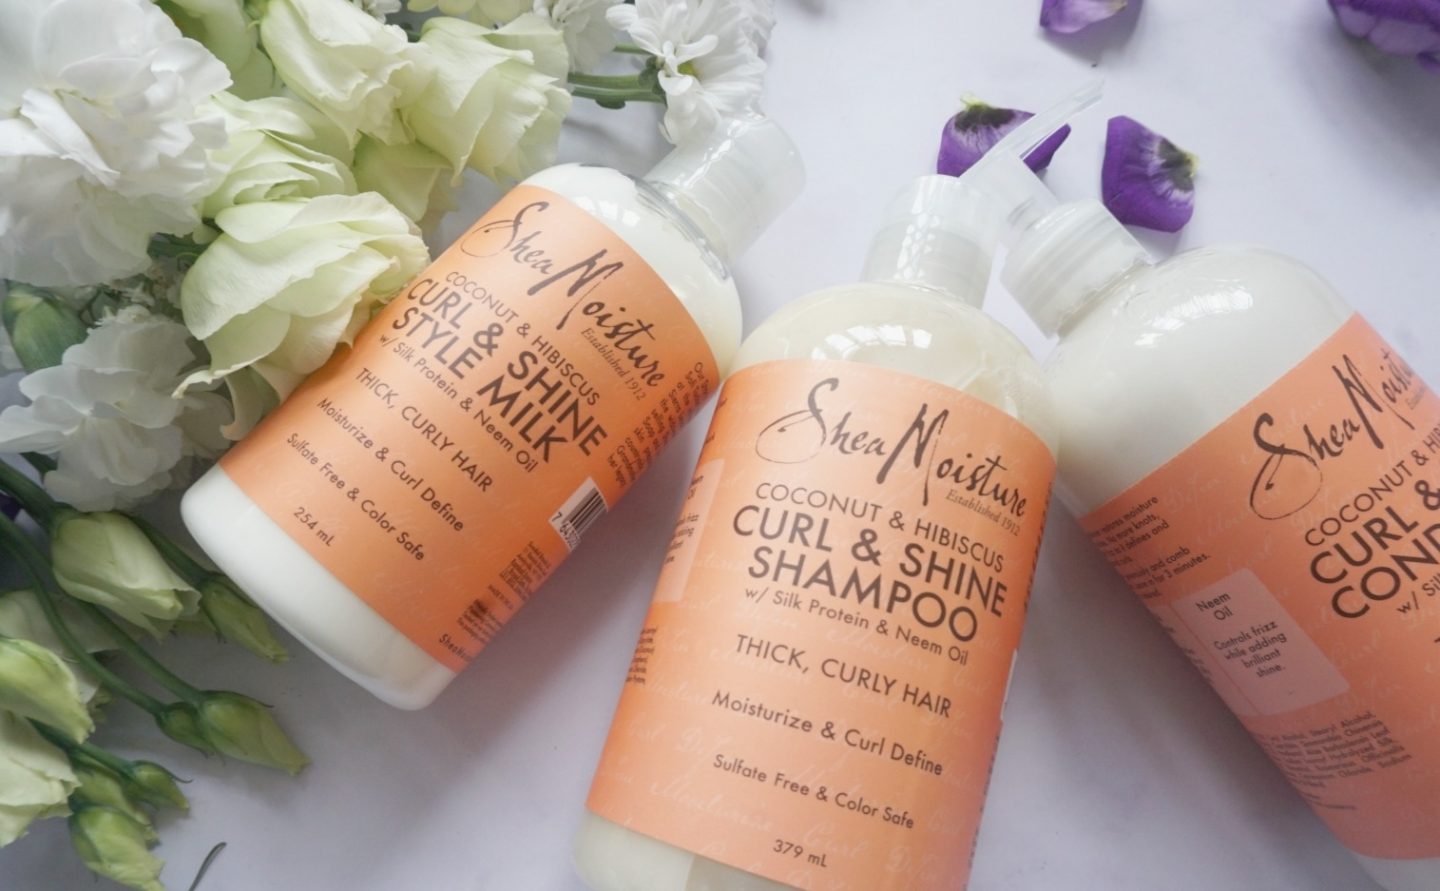 Shea Moisture curly girl uk approved www.extraordinarychaos.com